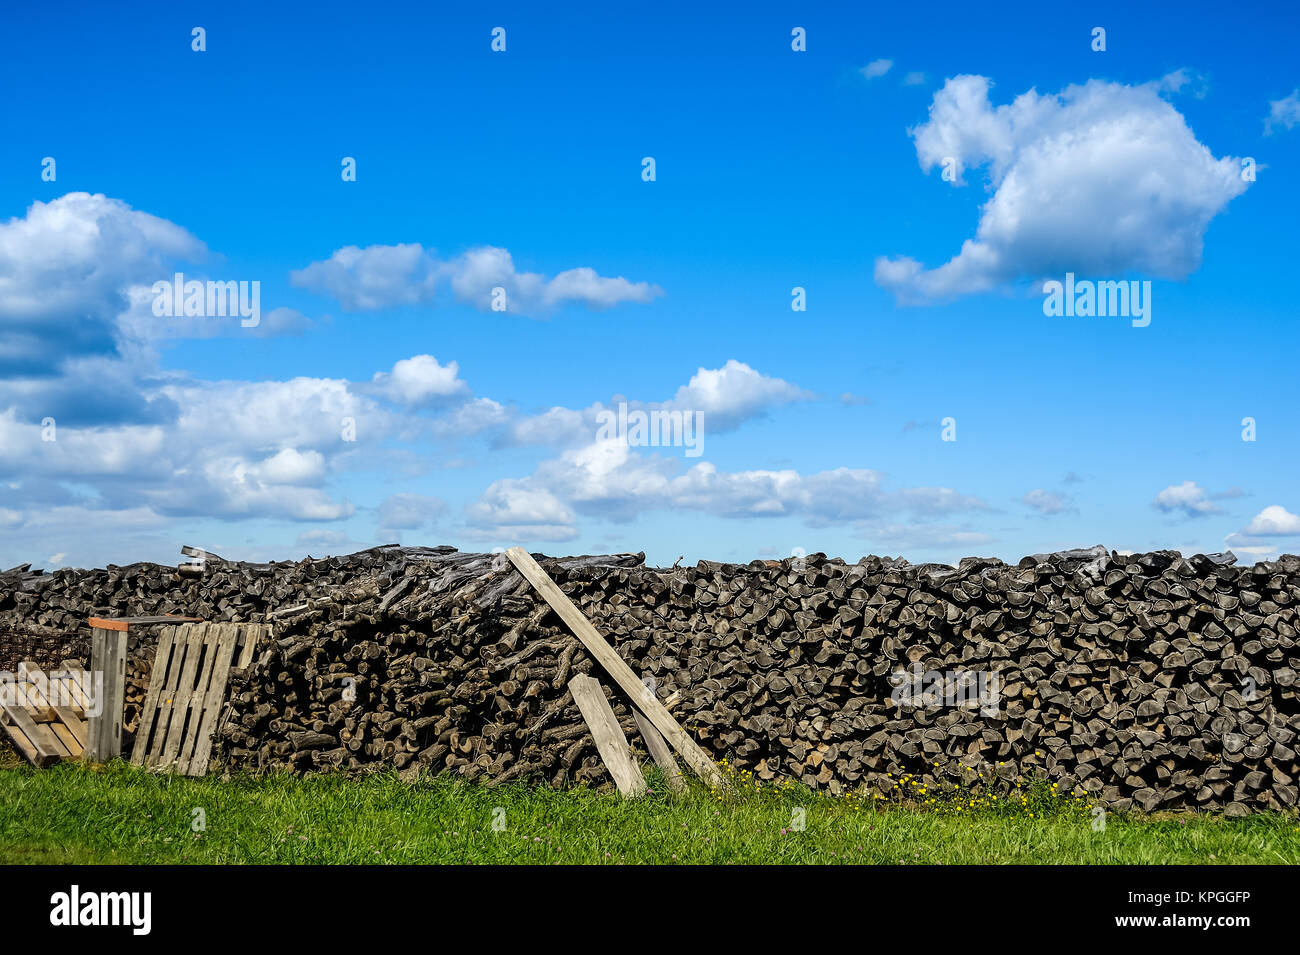 Outdoor wooden warehouse with clouds and blue sky Stock Photo